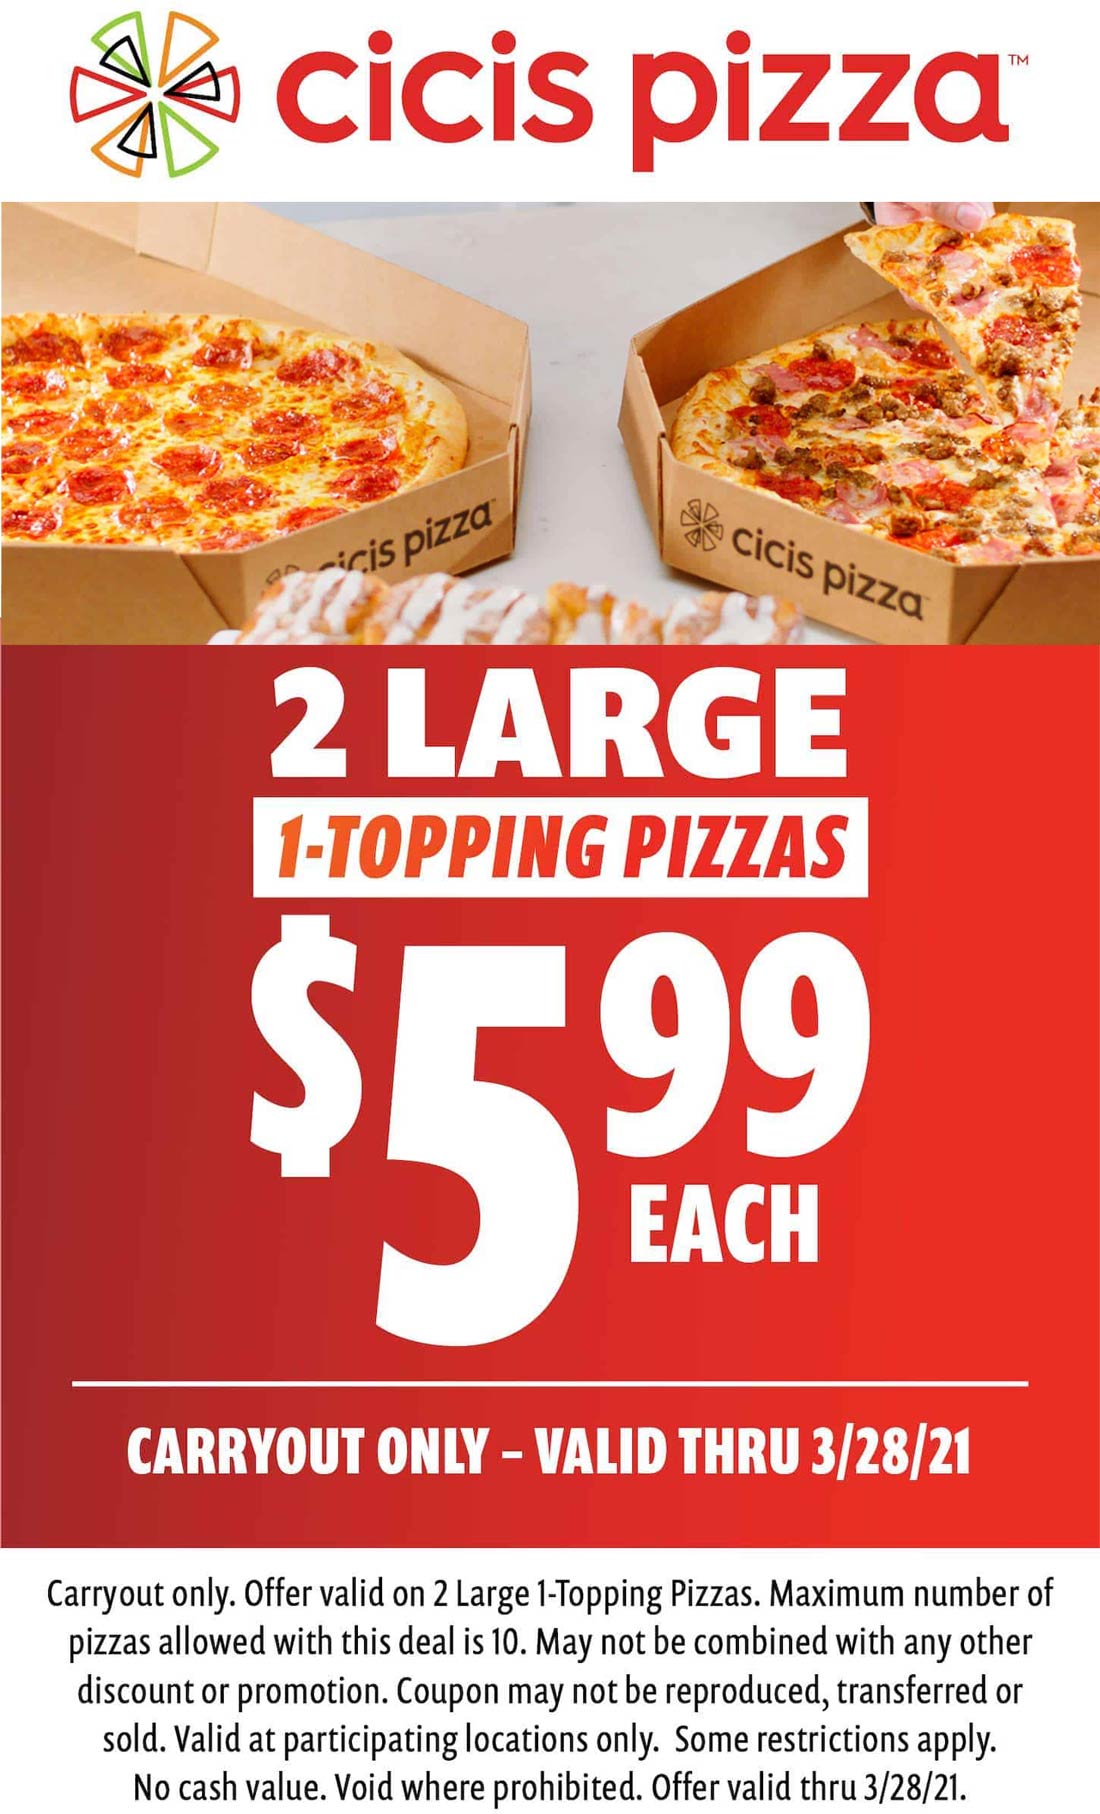 Large 1topping pizzas = 6 each as carryout at Cicis Pizza cicispizza